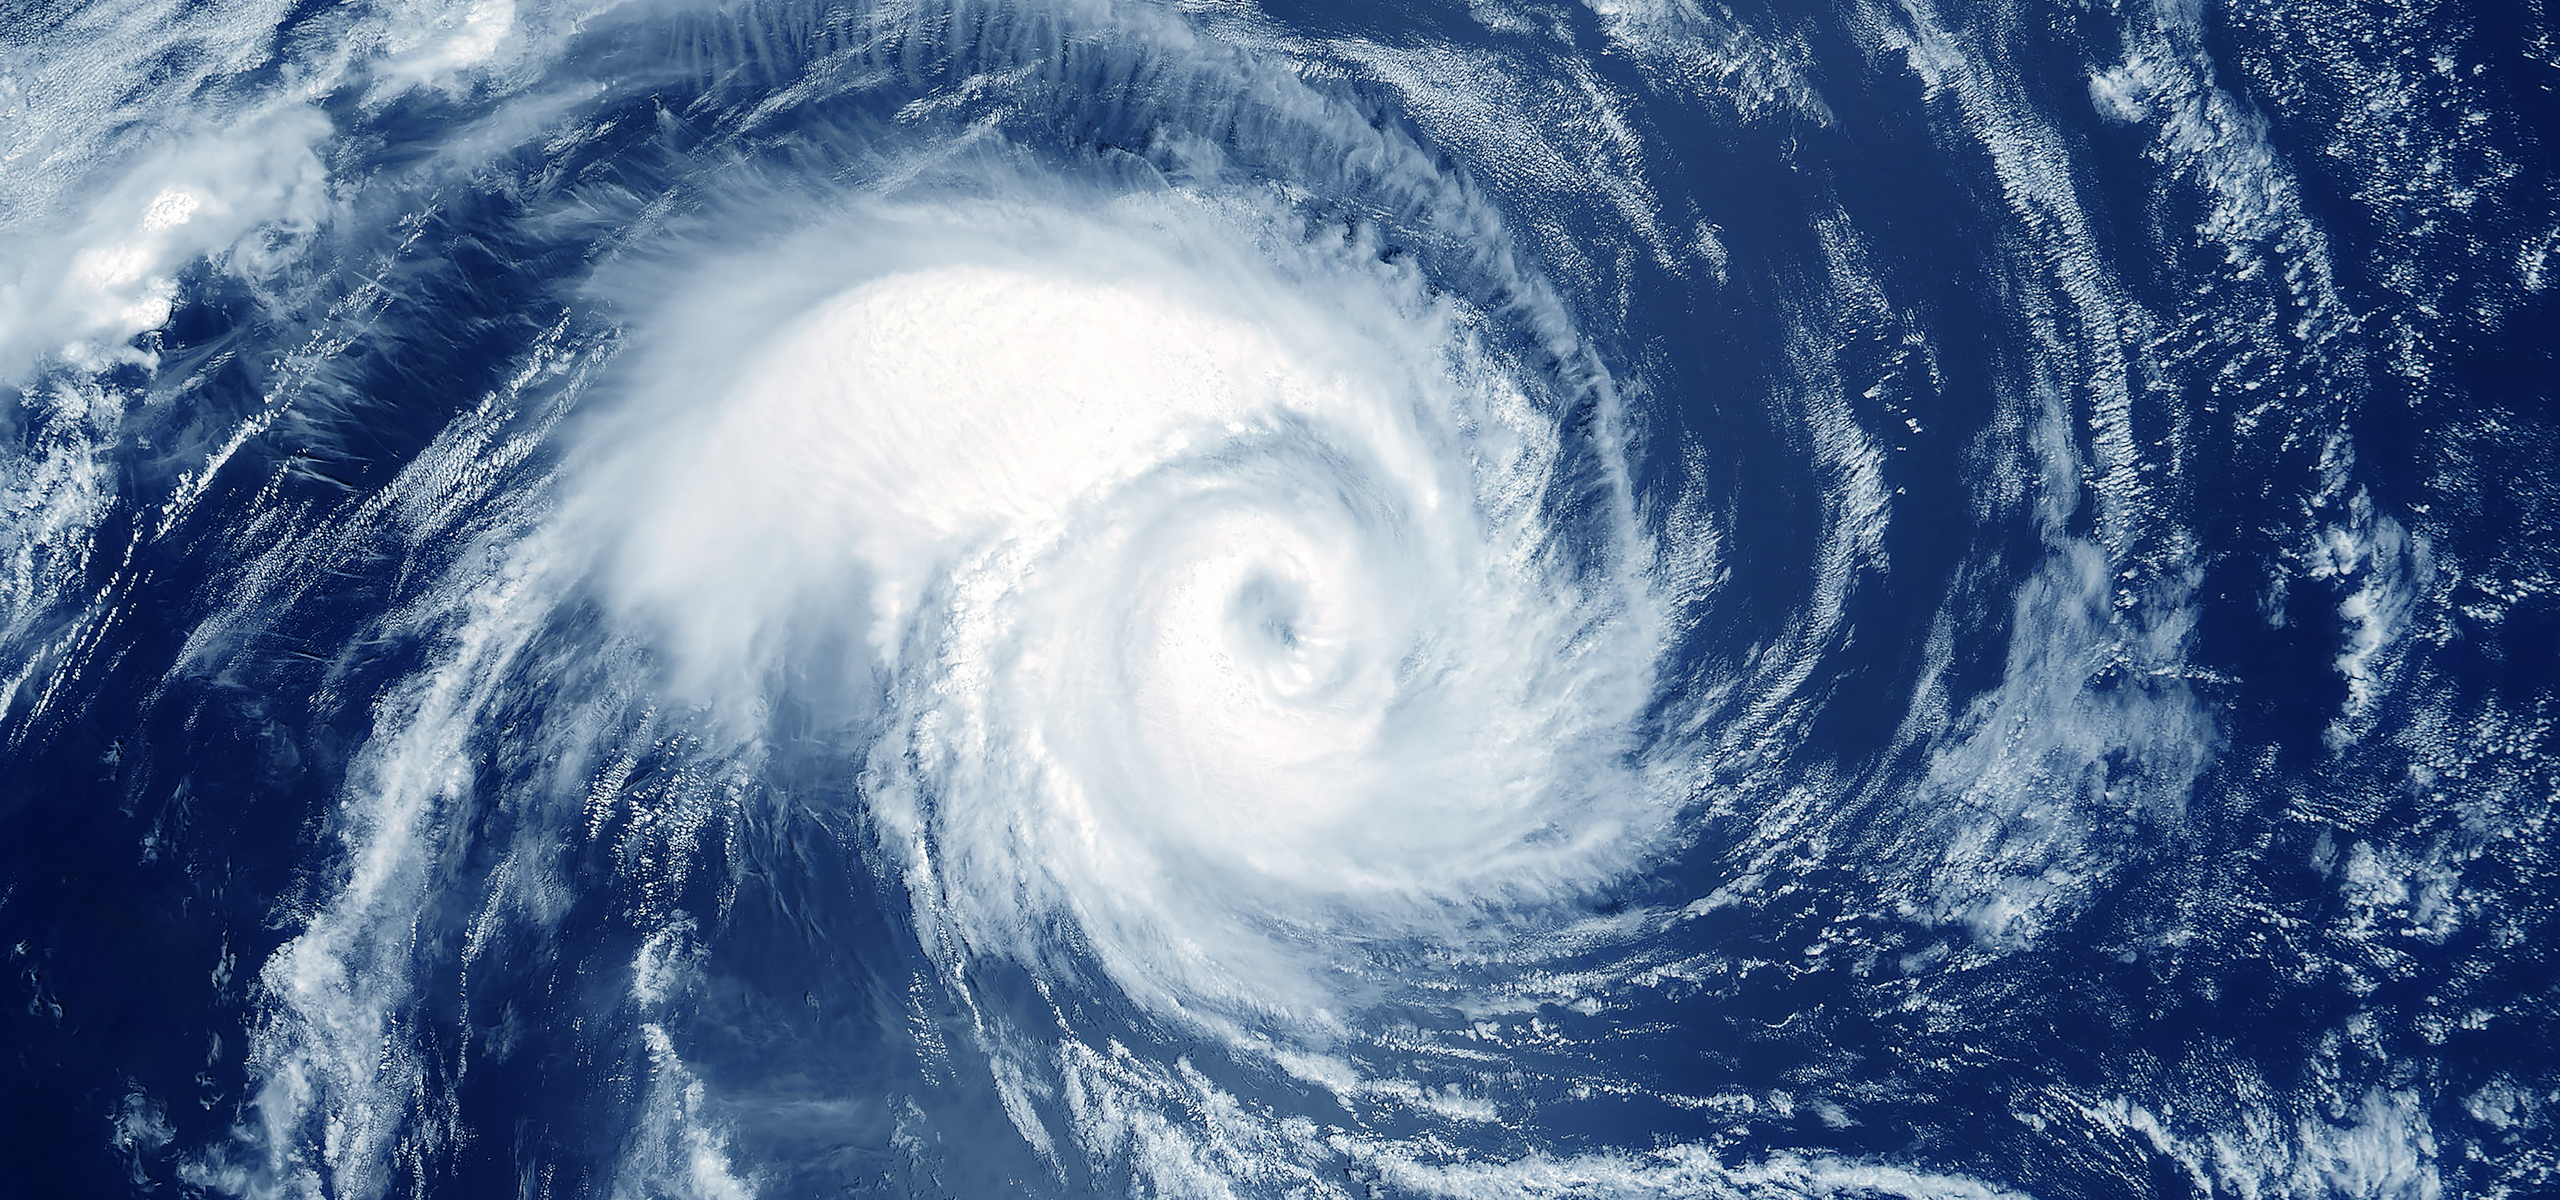 Aerial view of a hurricane forming in the ocean